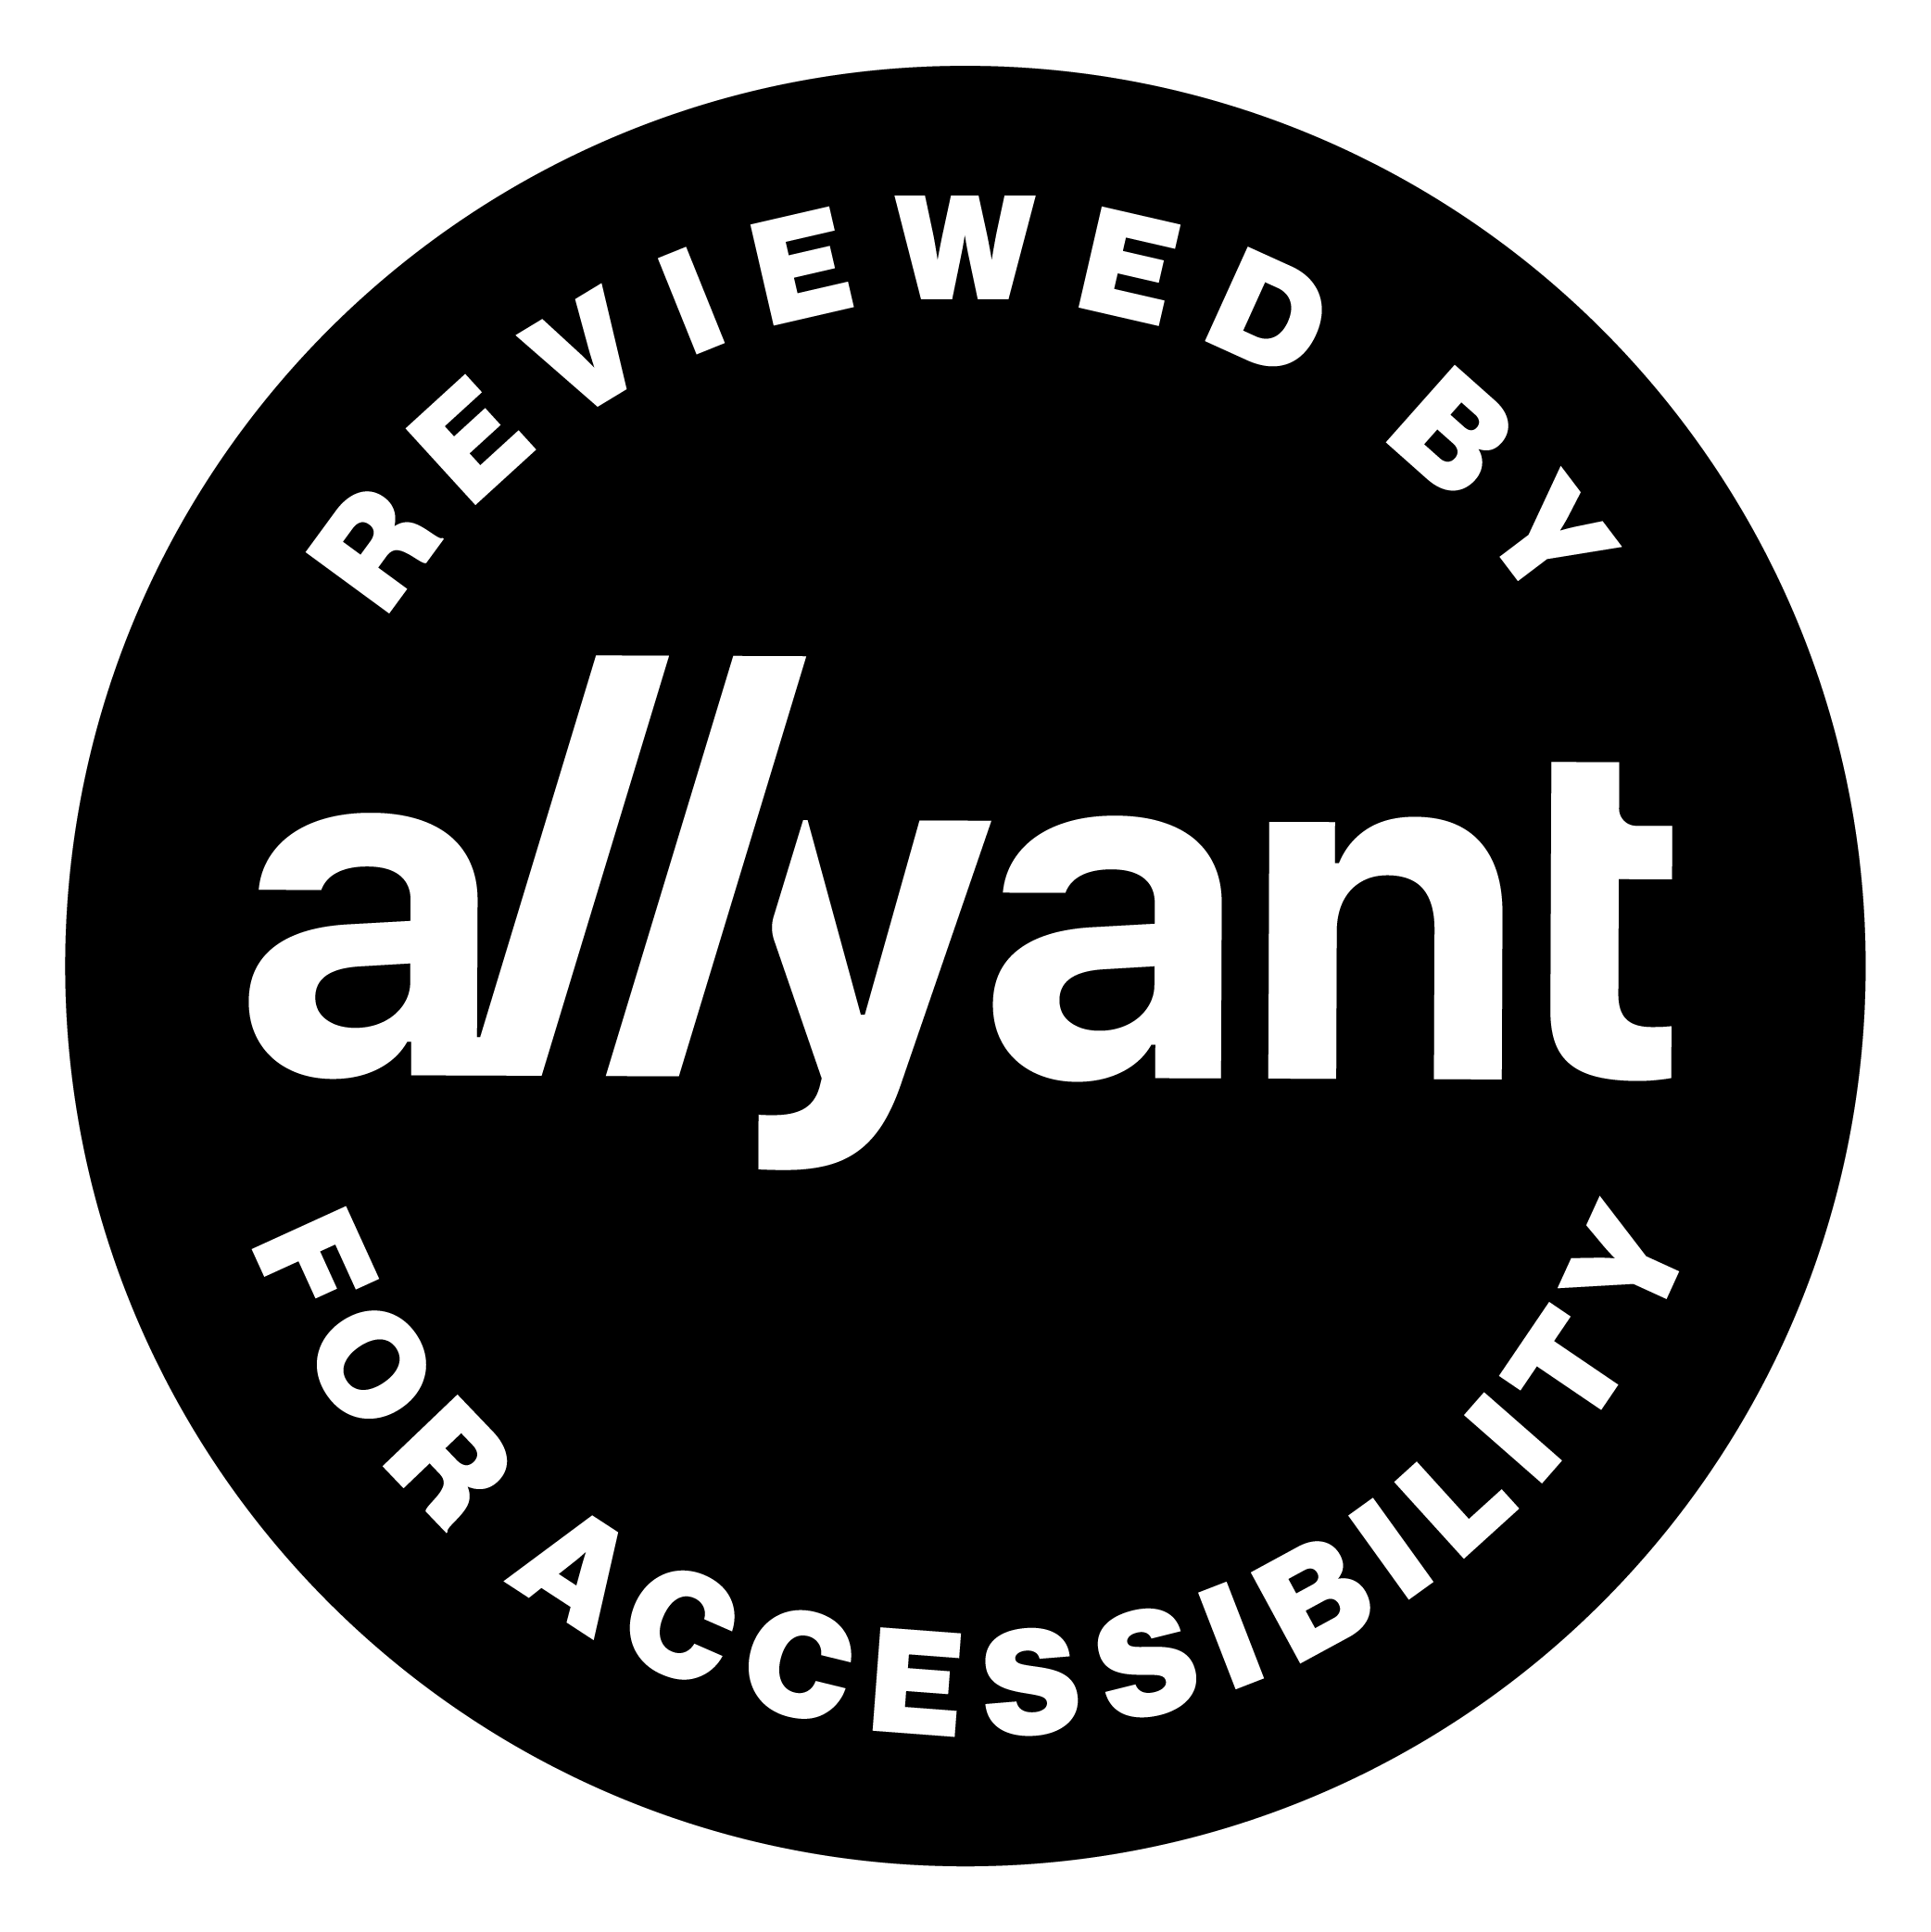 Reviewed by Allyant fir Accessibility